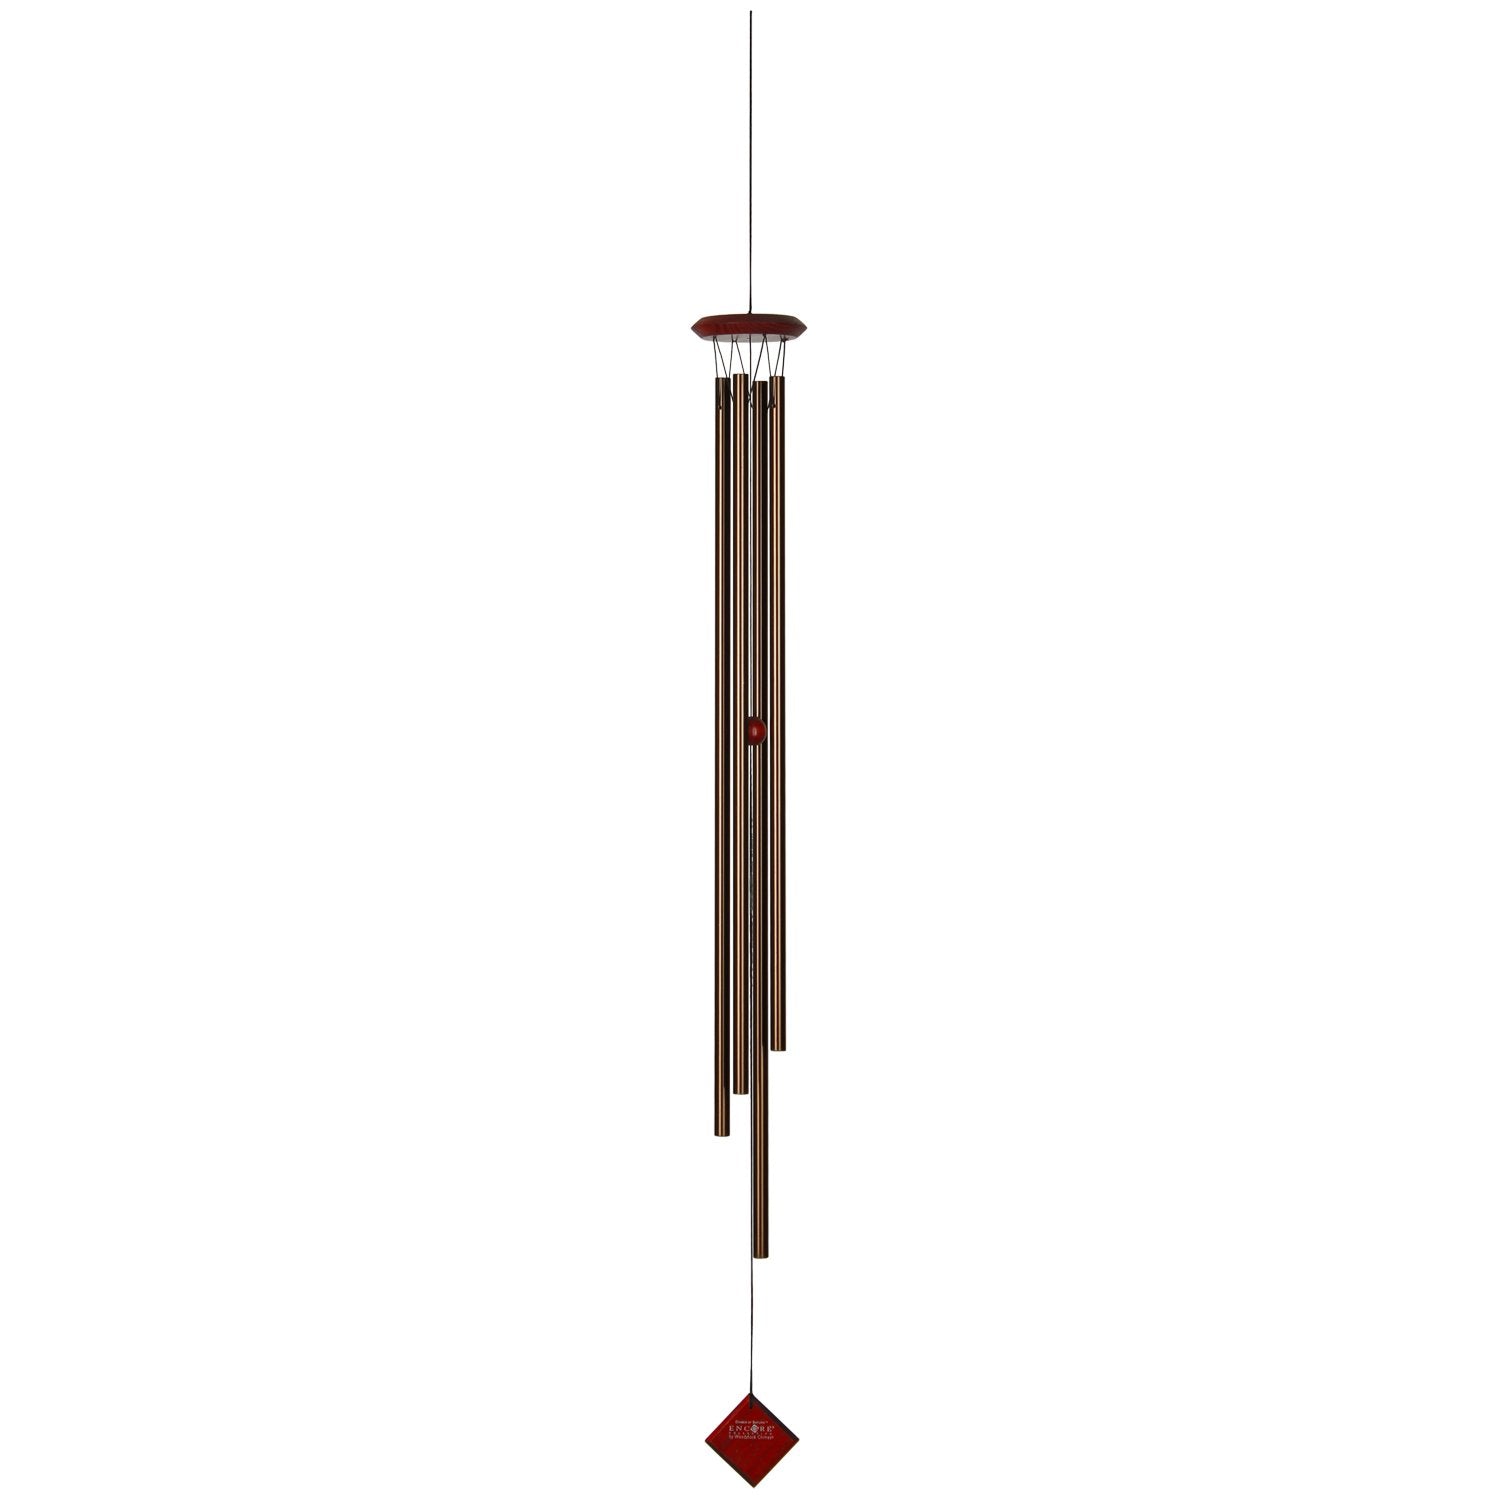 Encore Chimes of Saturn - Bronze full product image